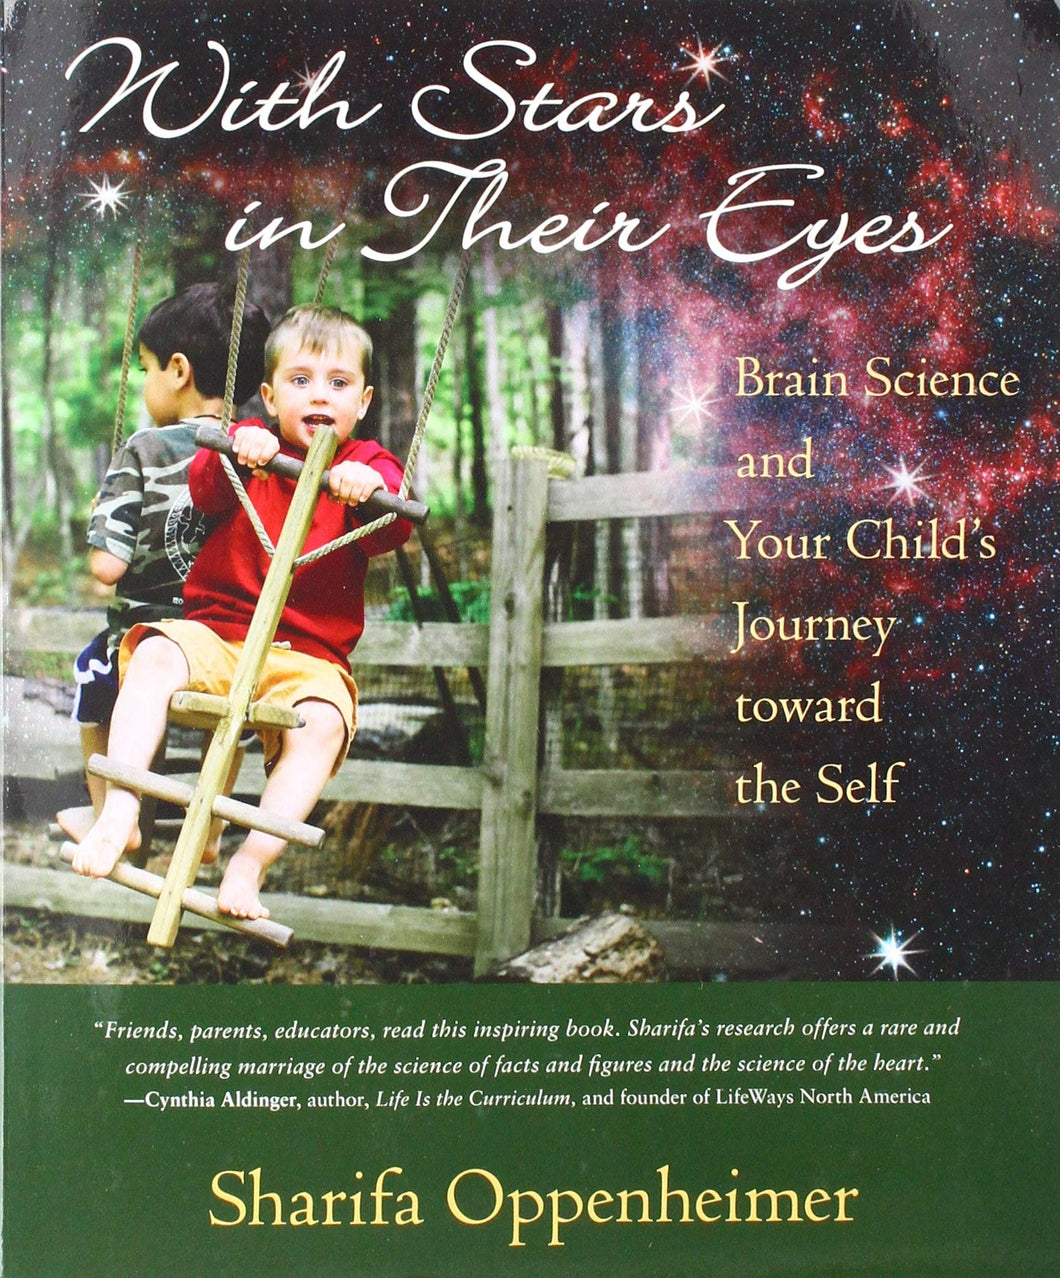 <i>With Stars in Their Eyes: Brain Science and Your Child's Journey toward the Self</i> by Sharifa Oppenheimer